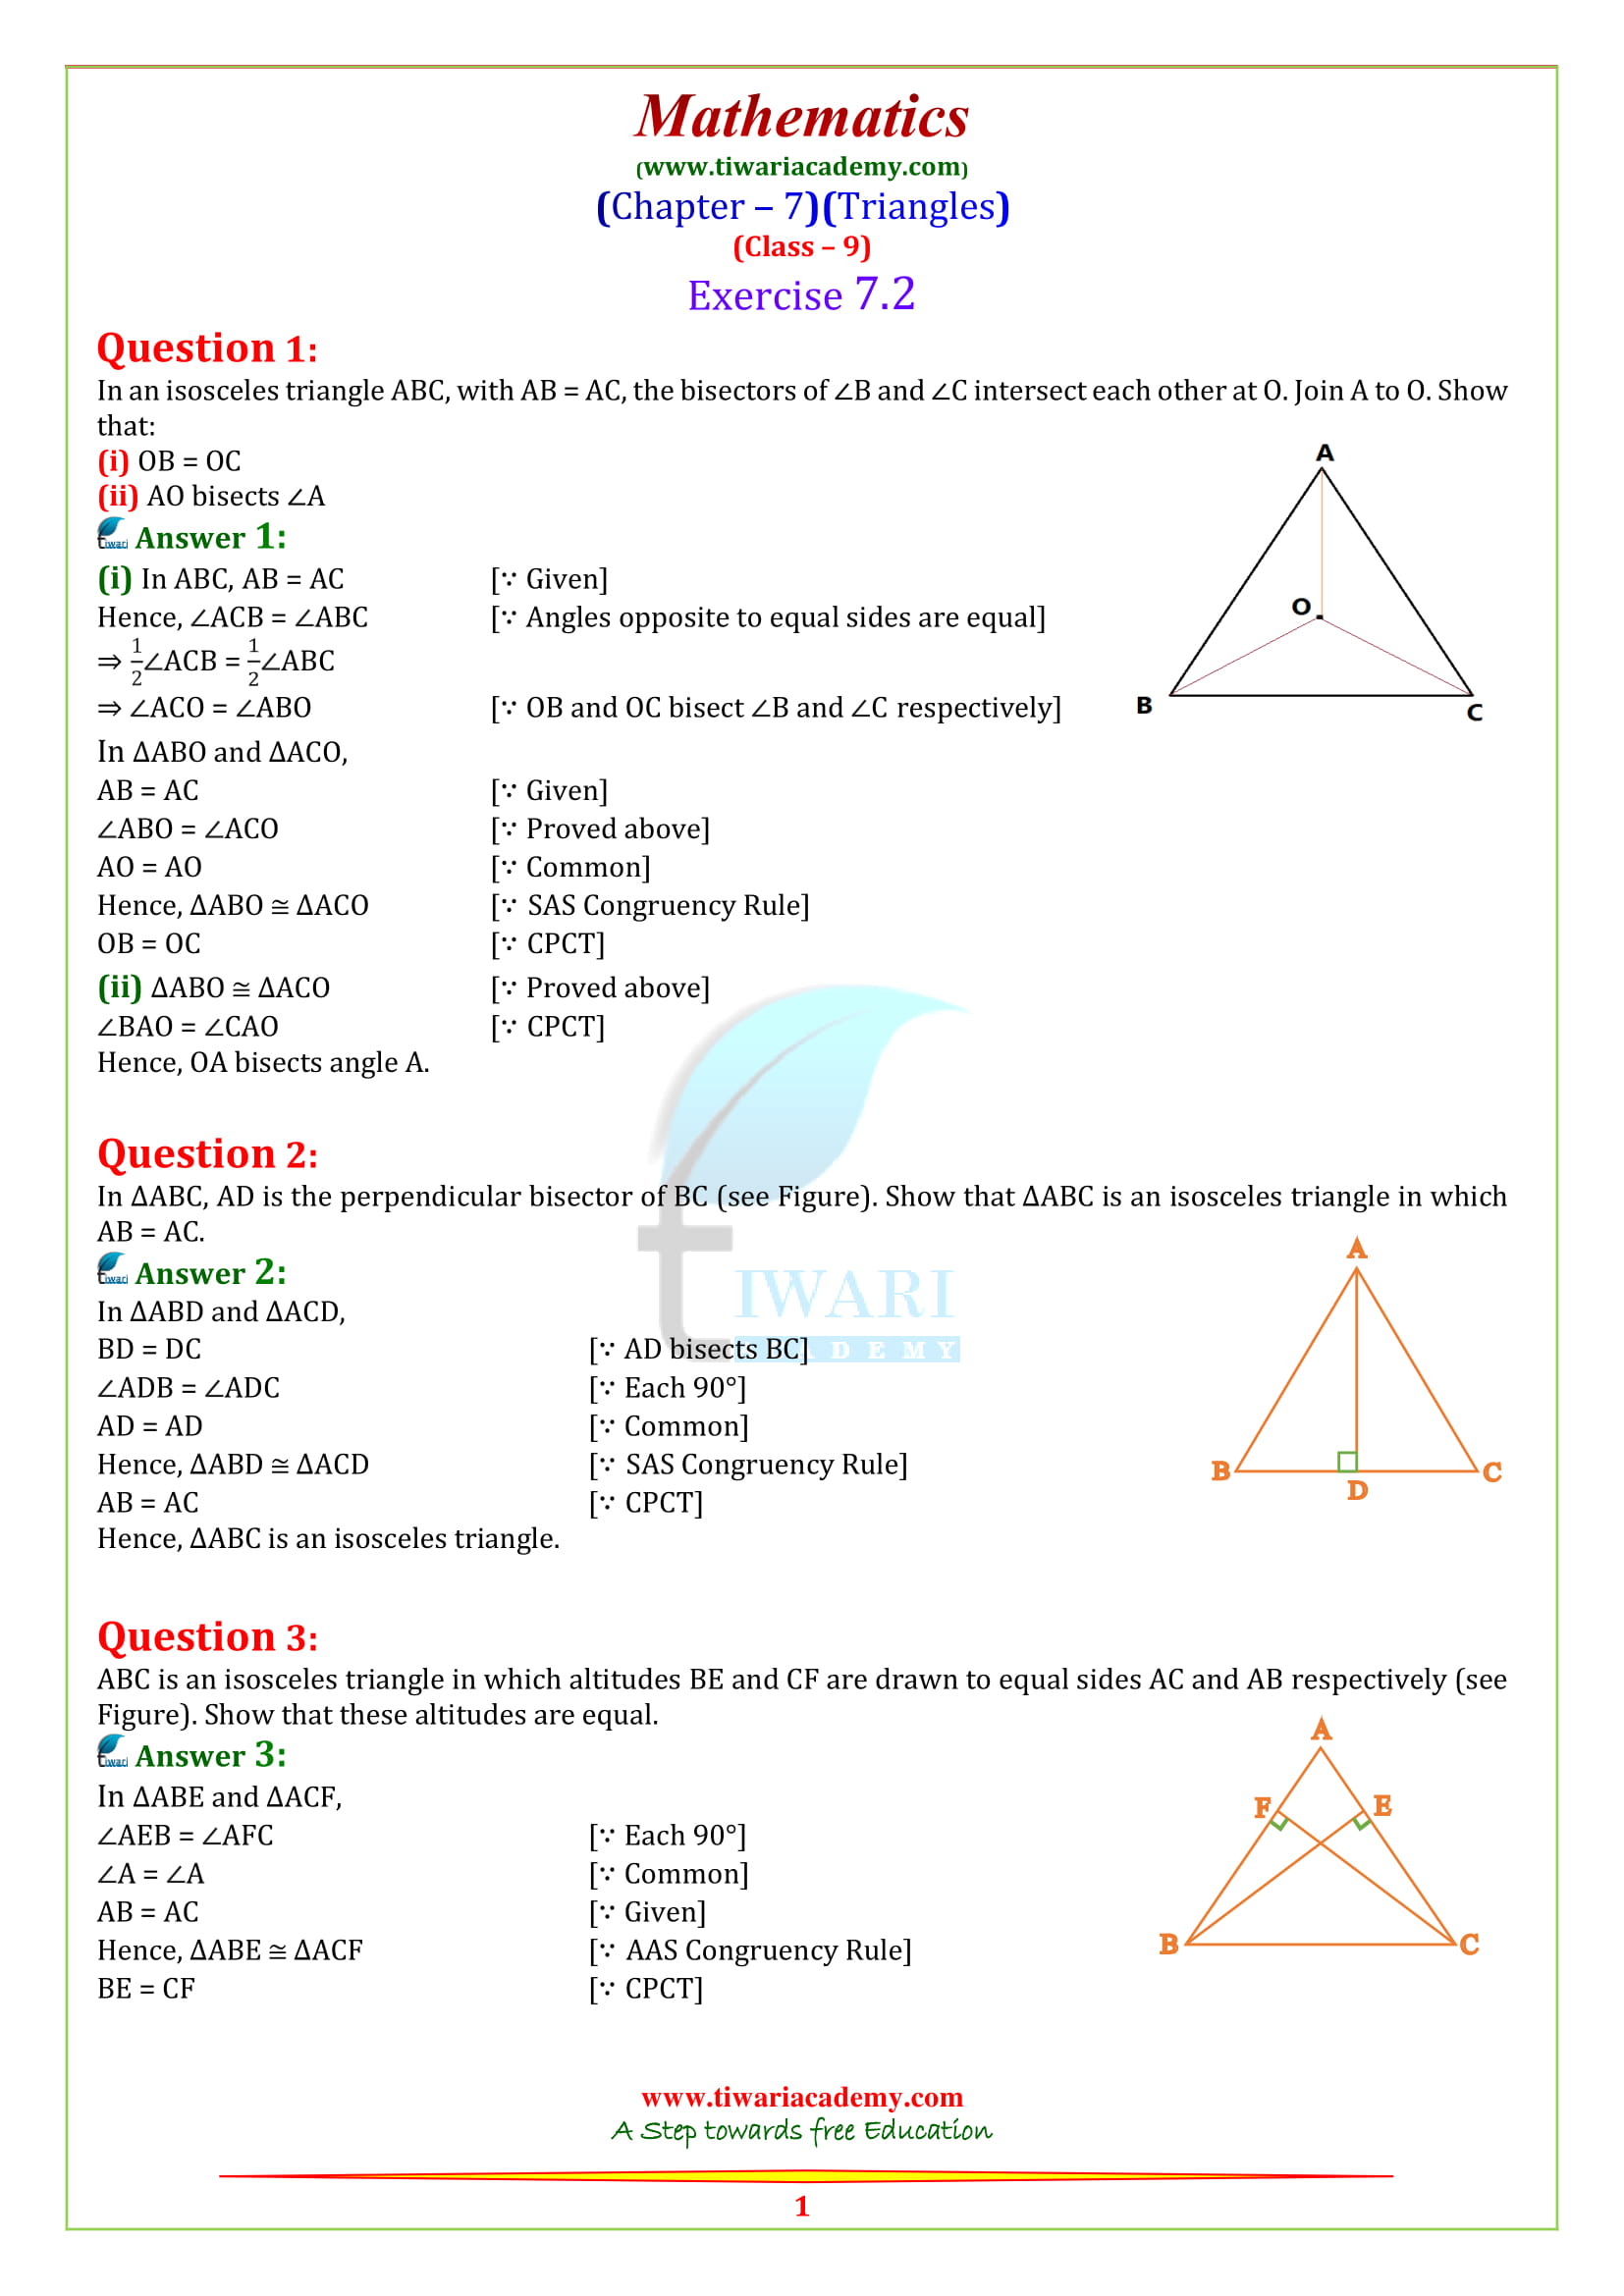 9th Maths Exercise 7.2 answers